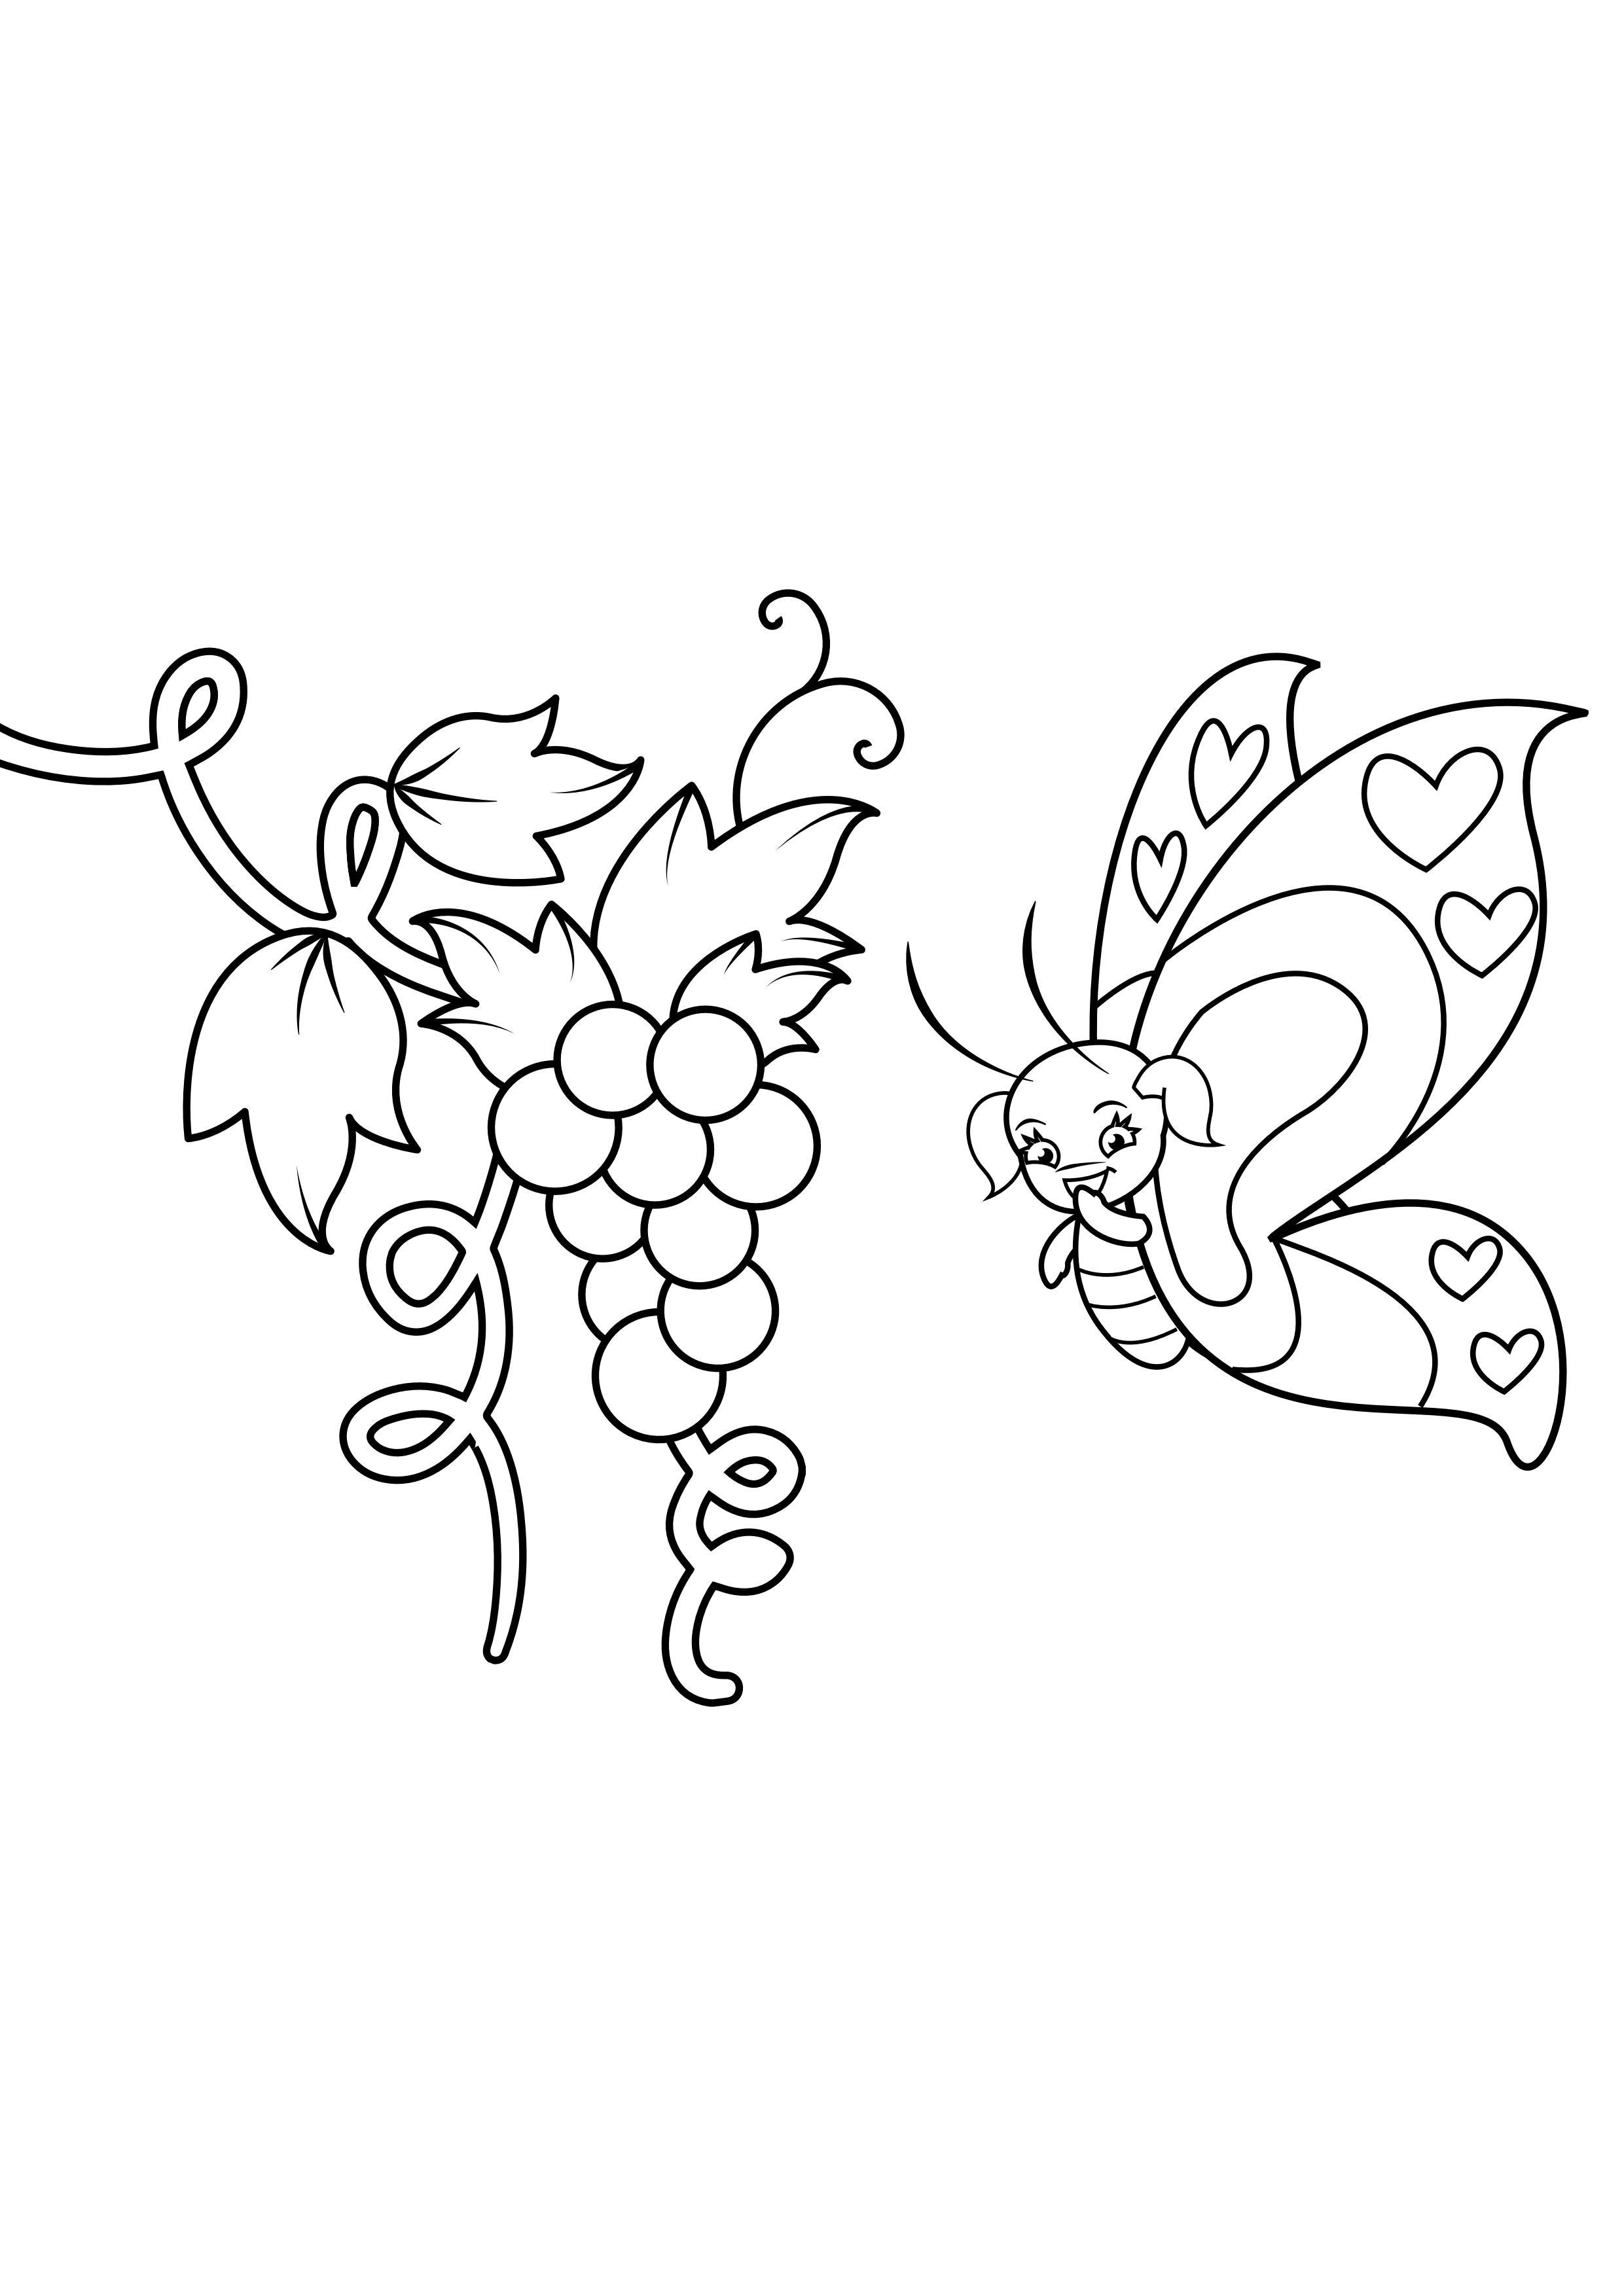 Coloring page butterfly in grapes